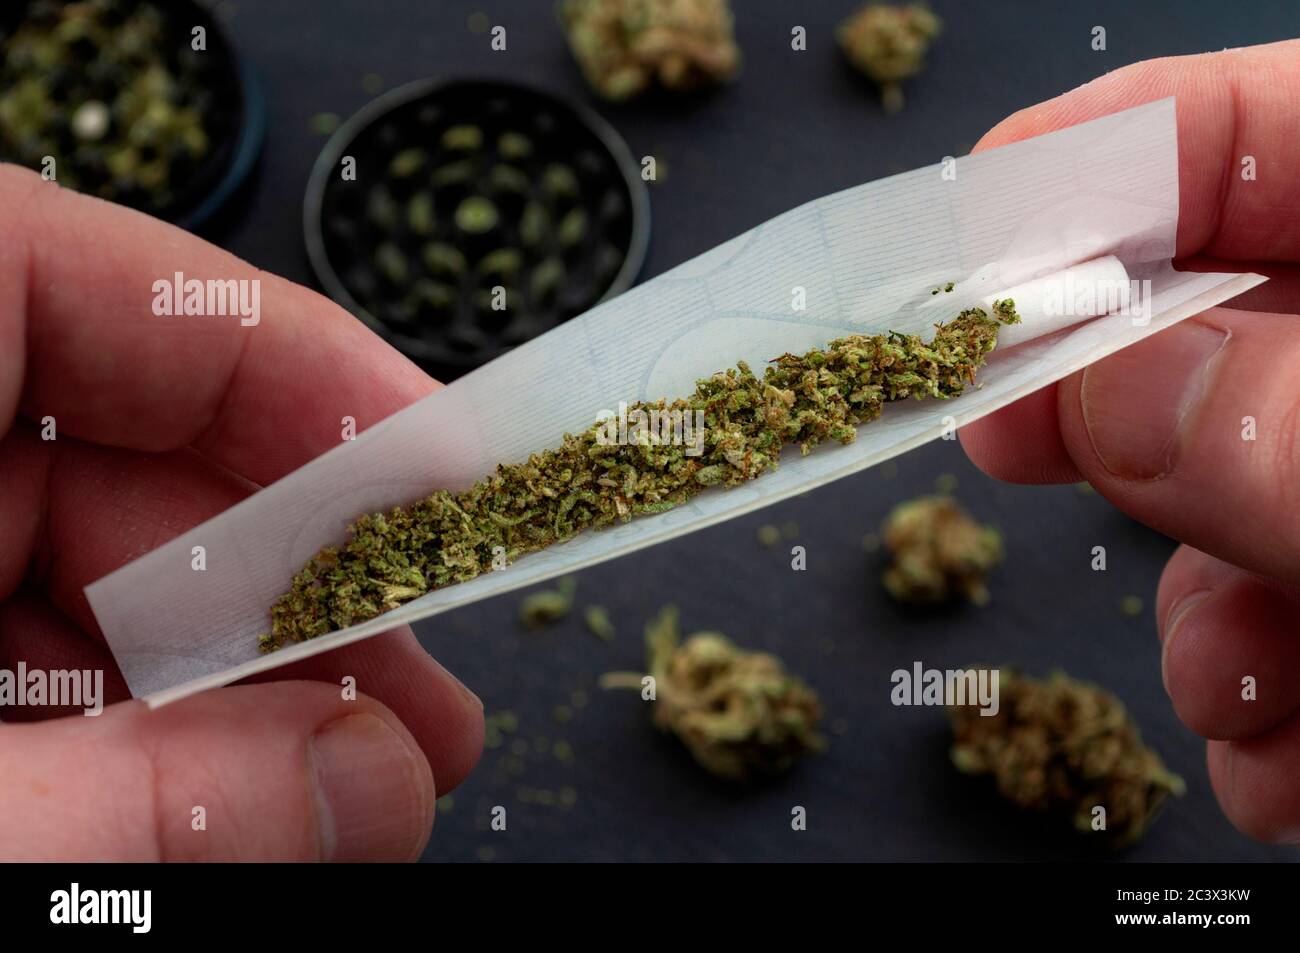 Preparing a joint and drug paraphernalia concept theme with close up man hands rolling a joint with herb girder to grind a cannabis buds in the Stock Photo